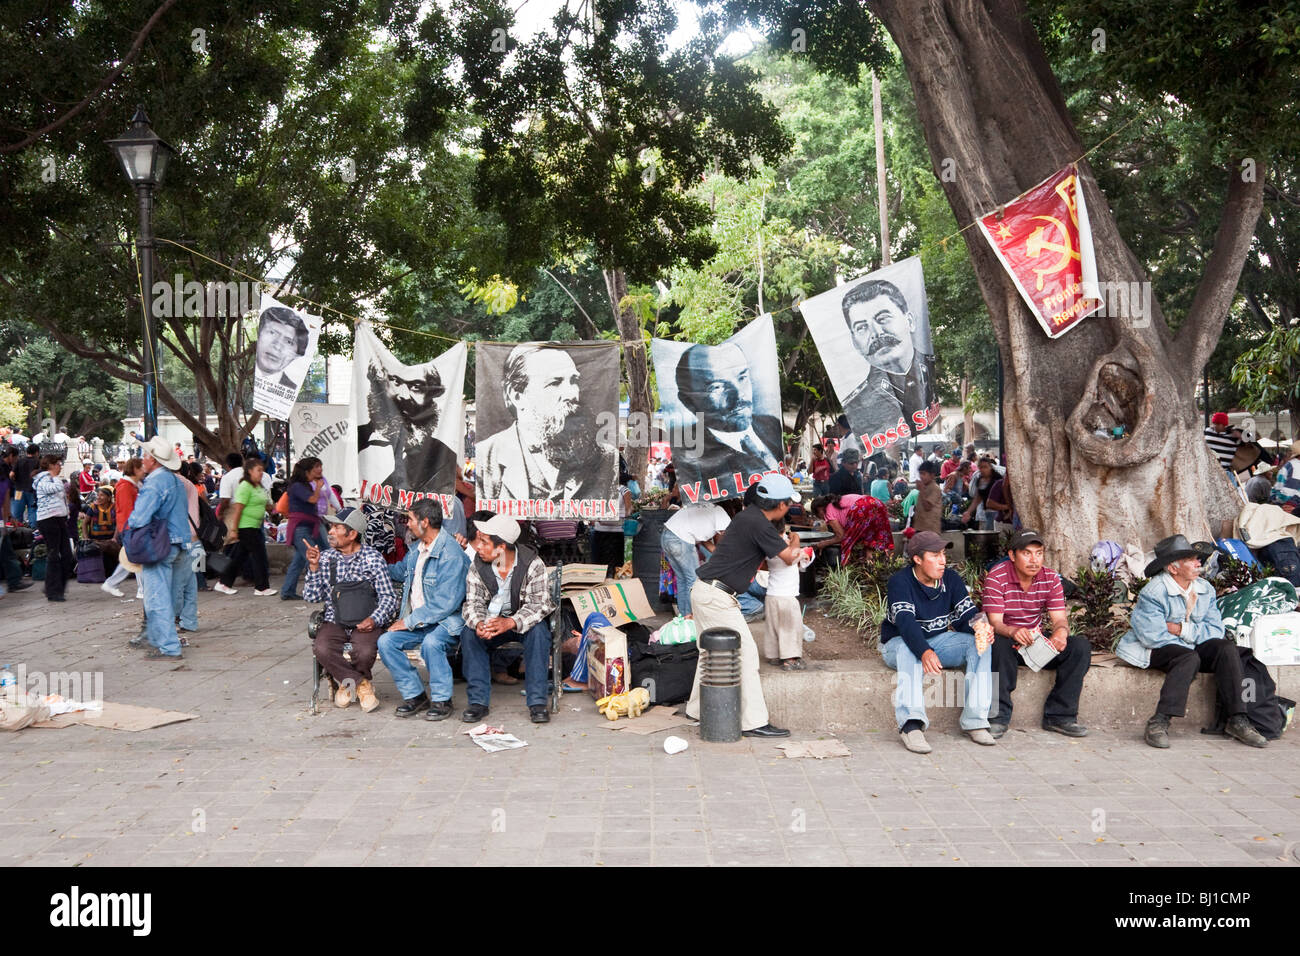 temporary sit-in at Oaxaca Zocalo by crowds of impoverished Mixteca people demanding social services for their rural communities Stock Photo